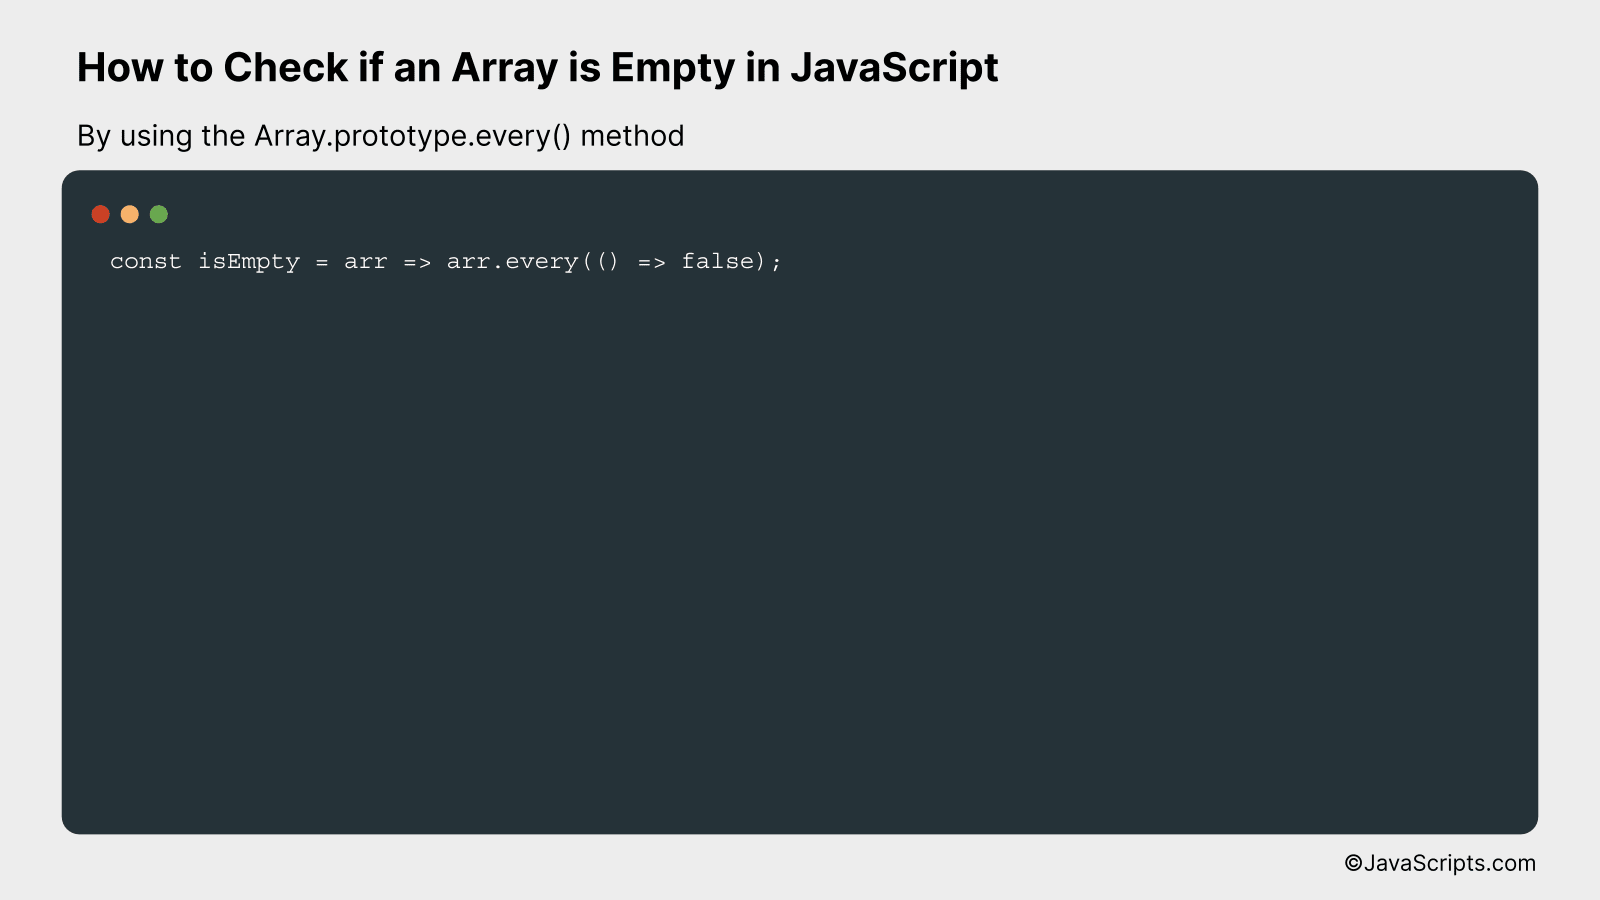 By using the Array.prototype.every() method